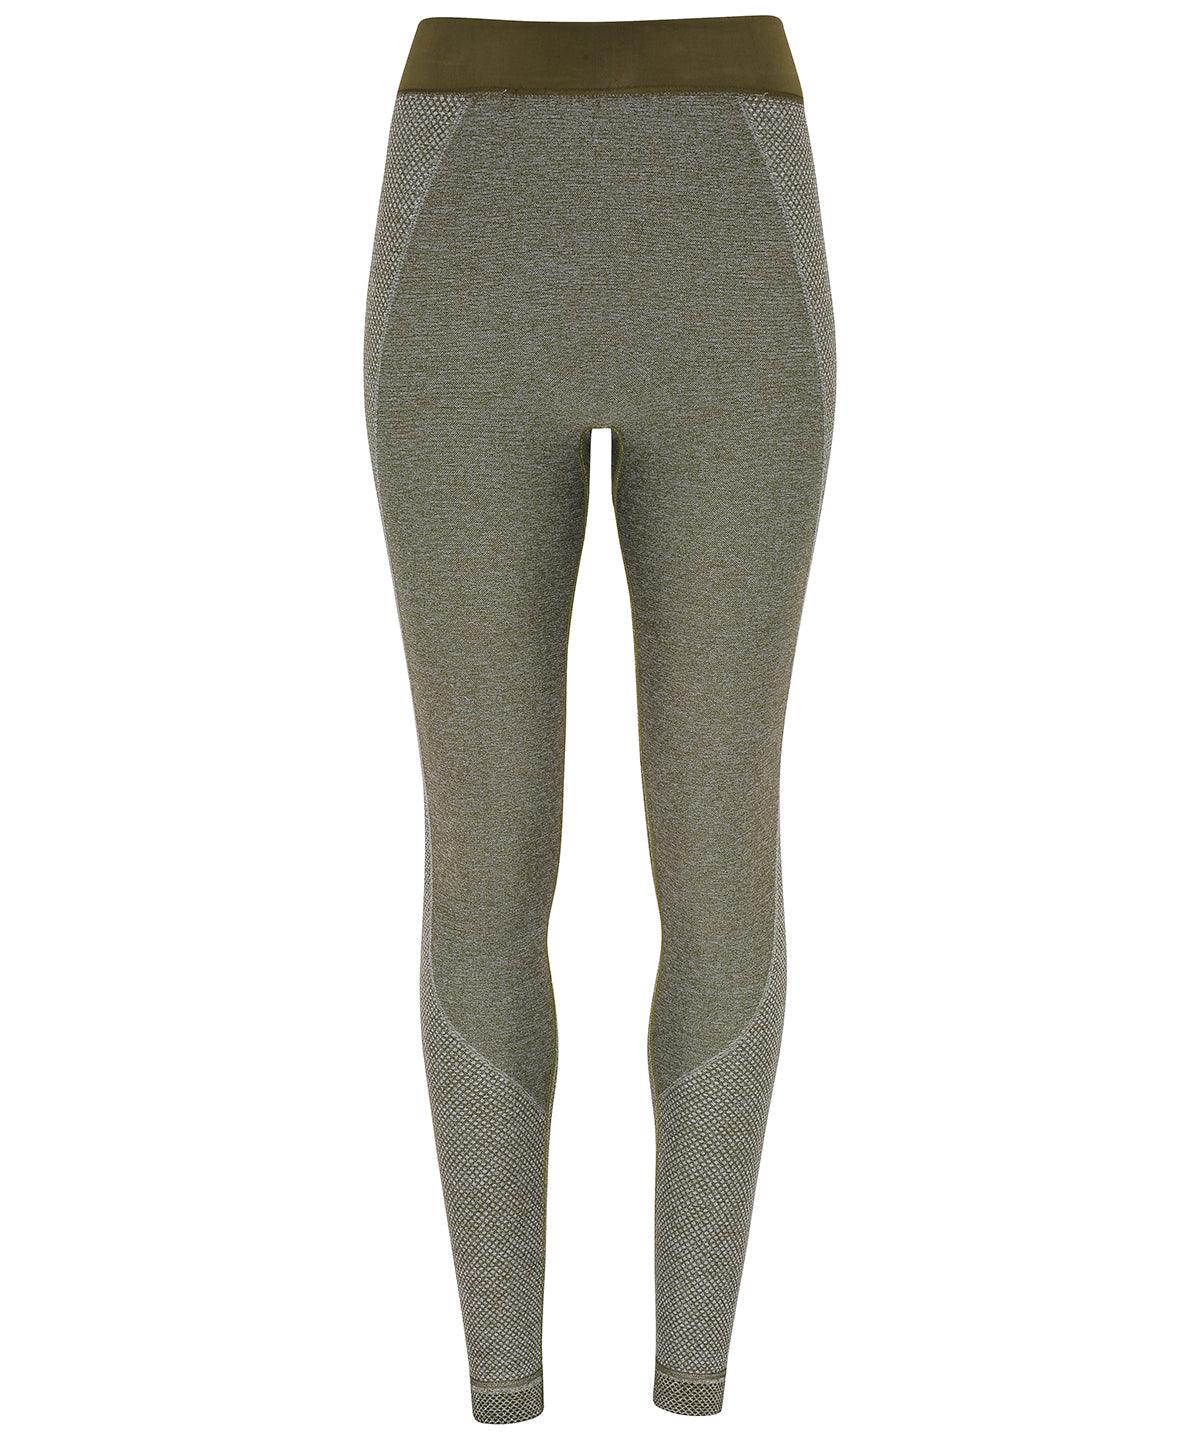 Olive - Women's TriDri® seamless '3D fit' multi-sport sculpt leggings Leggings TriDri® Activewear & Performance, Athleisurewear, Back to Fitness, Back to the Gym, Co-ords, Exclusives, Fashion Leggings, Leggings, Must Haves, Rebrandable, Sports & Leisure, Trousers & Shorts Schoolwear Centres